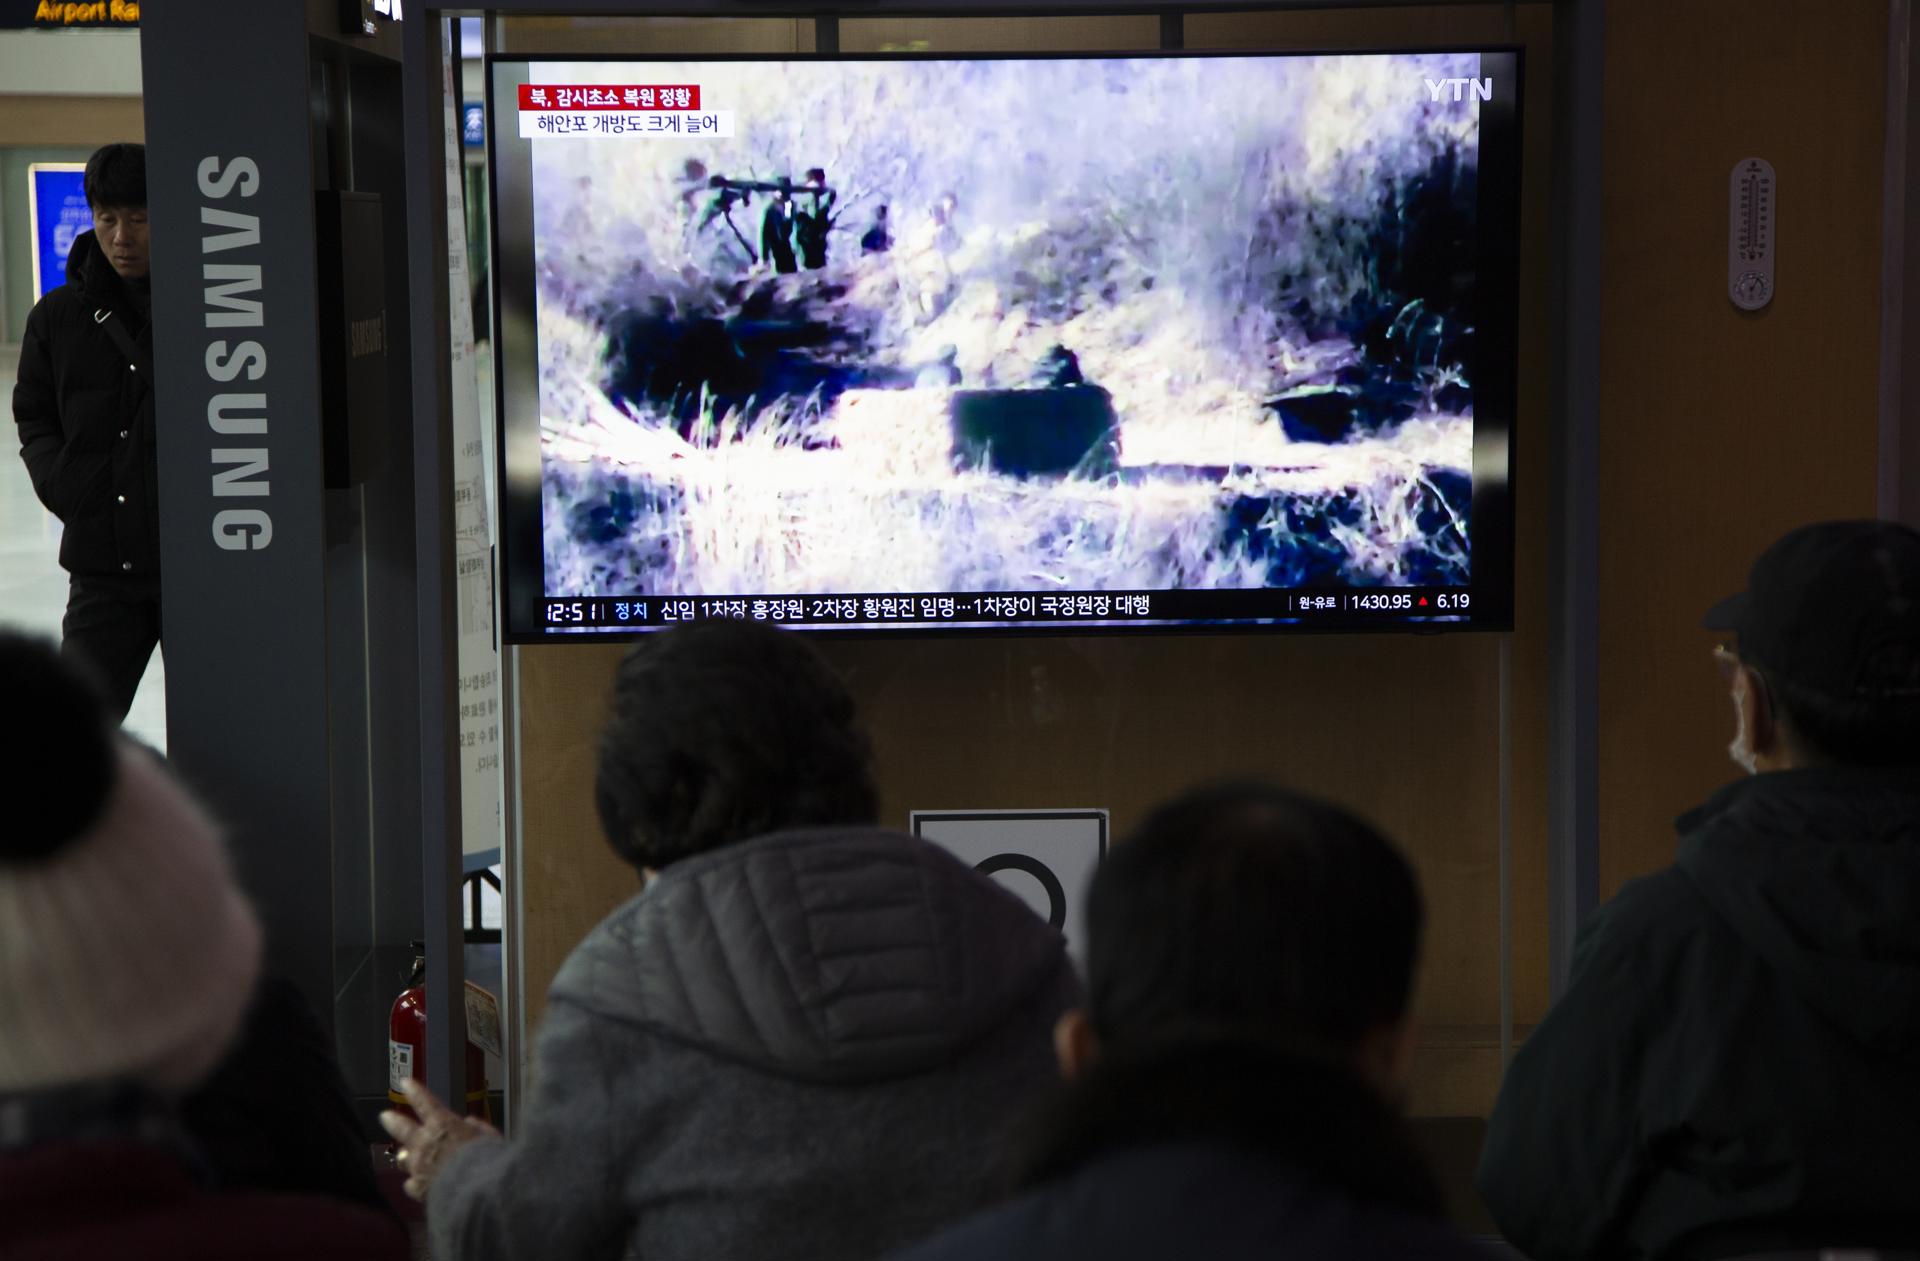 People watch a TV monitor displaying daily news at a station in Seoul, South Korea, 27 November 2023. According to a statement by South Korean military officials made on 27 November, North Korea deployed troops and equipment to Demilitarized Zone (DMZ) ground posts after the North vowed to resume all military measures halted under a 2018 deal. EFE-EPA/JEON HEON-KYUN